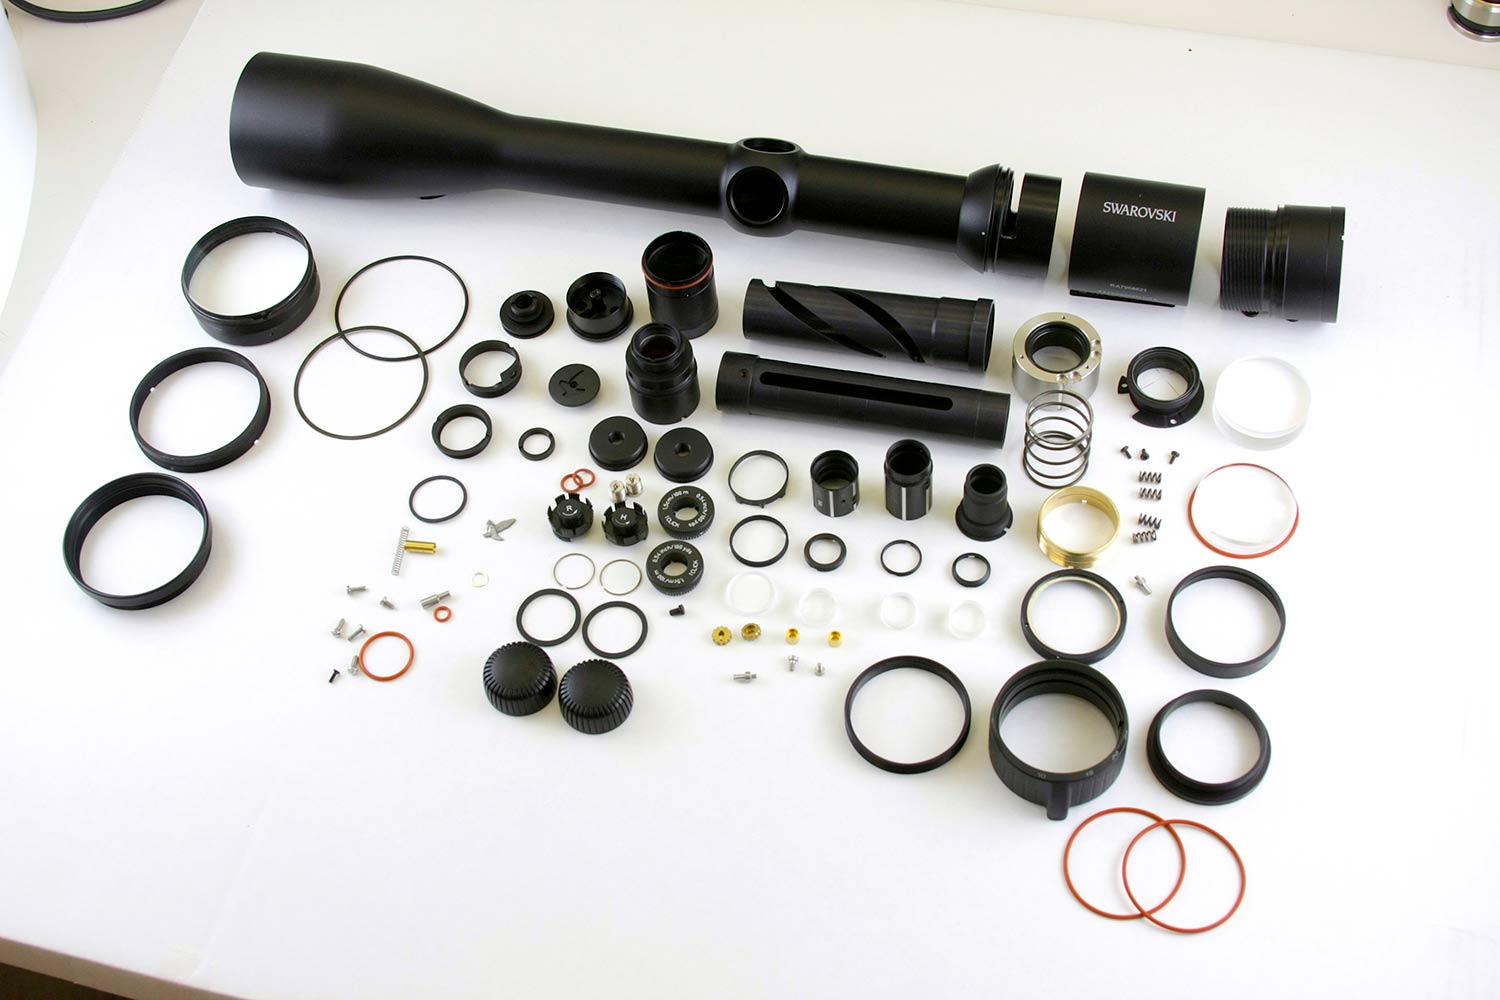 Riflescope parts on a white table.